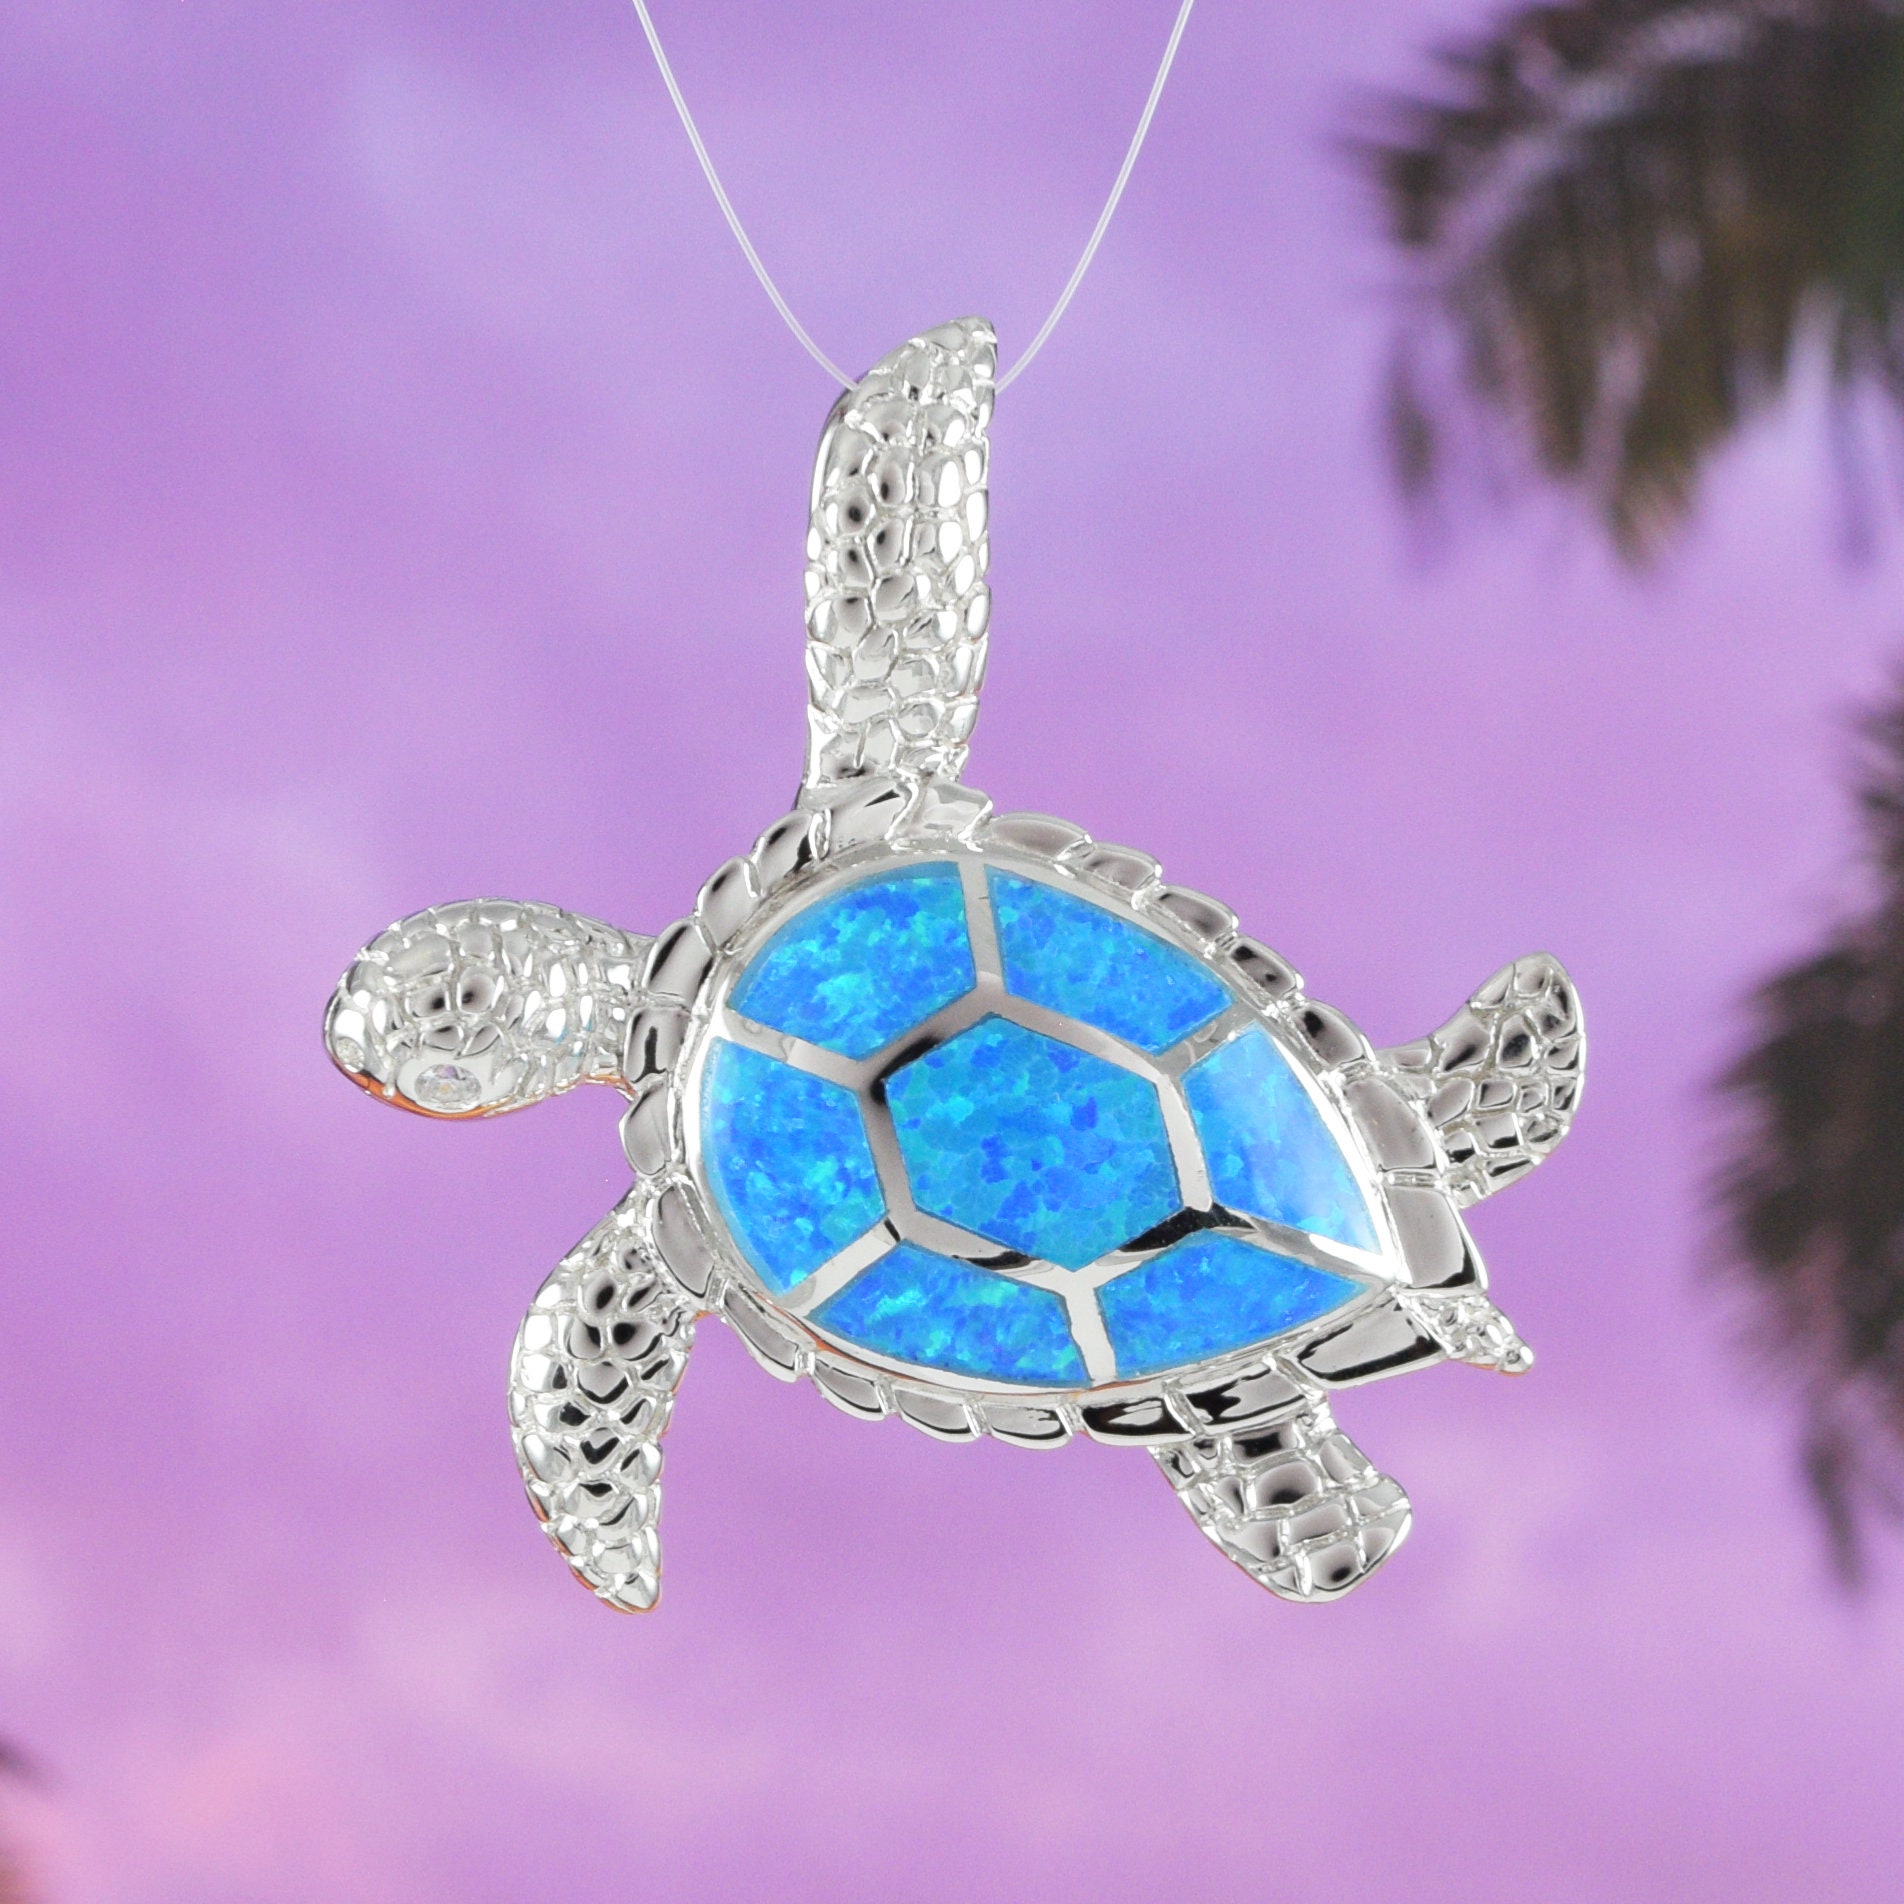 Gorgeous Large Hawaiian Sea Turtle Necklace, Sterling Silver Blue